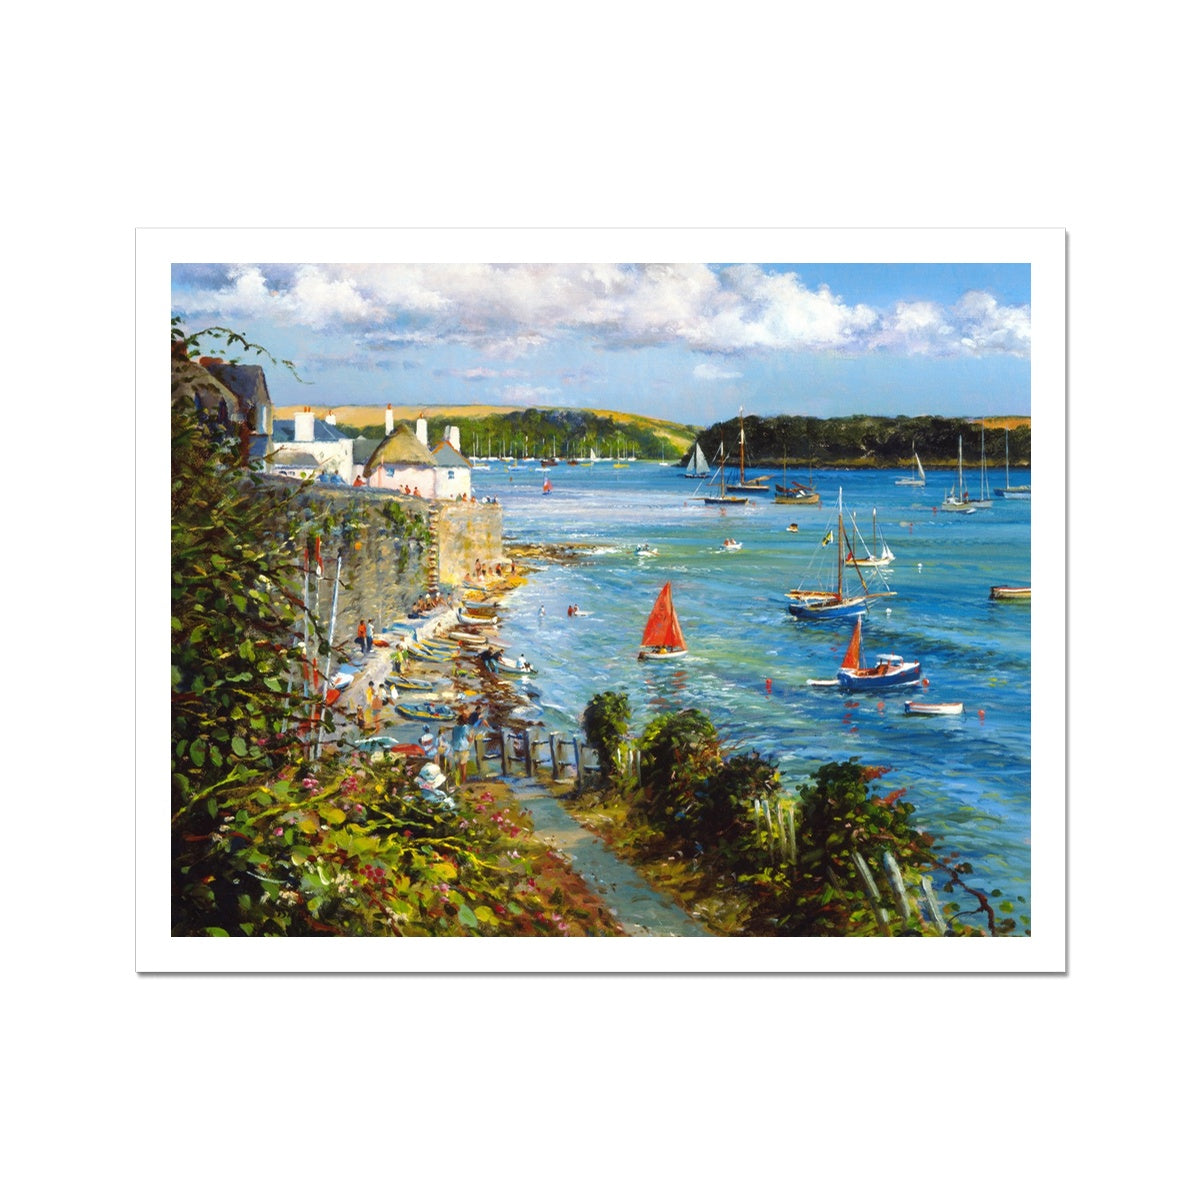 Ted Dyer Fine Art Print. Open Edition Cornish Art Print. 'Wild Flowers and Blue Watres, St Mawes'. Cornwall Art Gallery